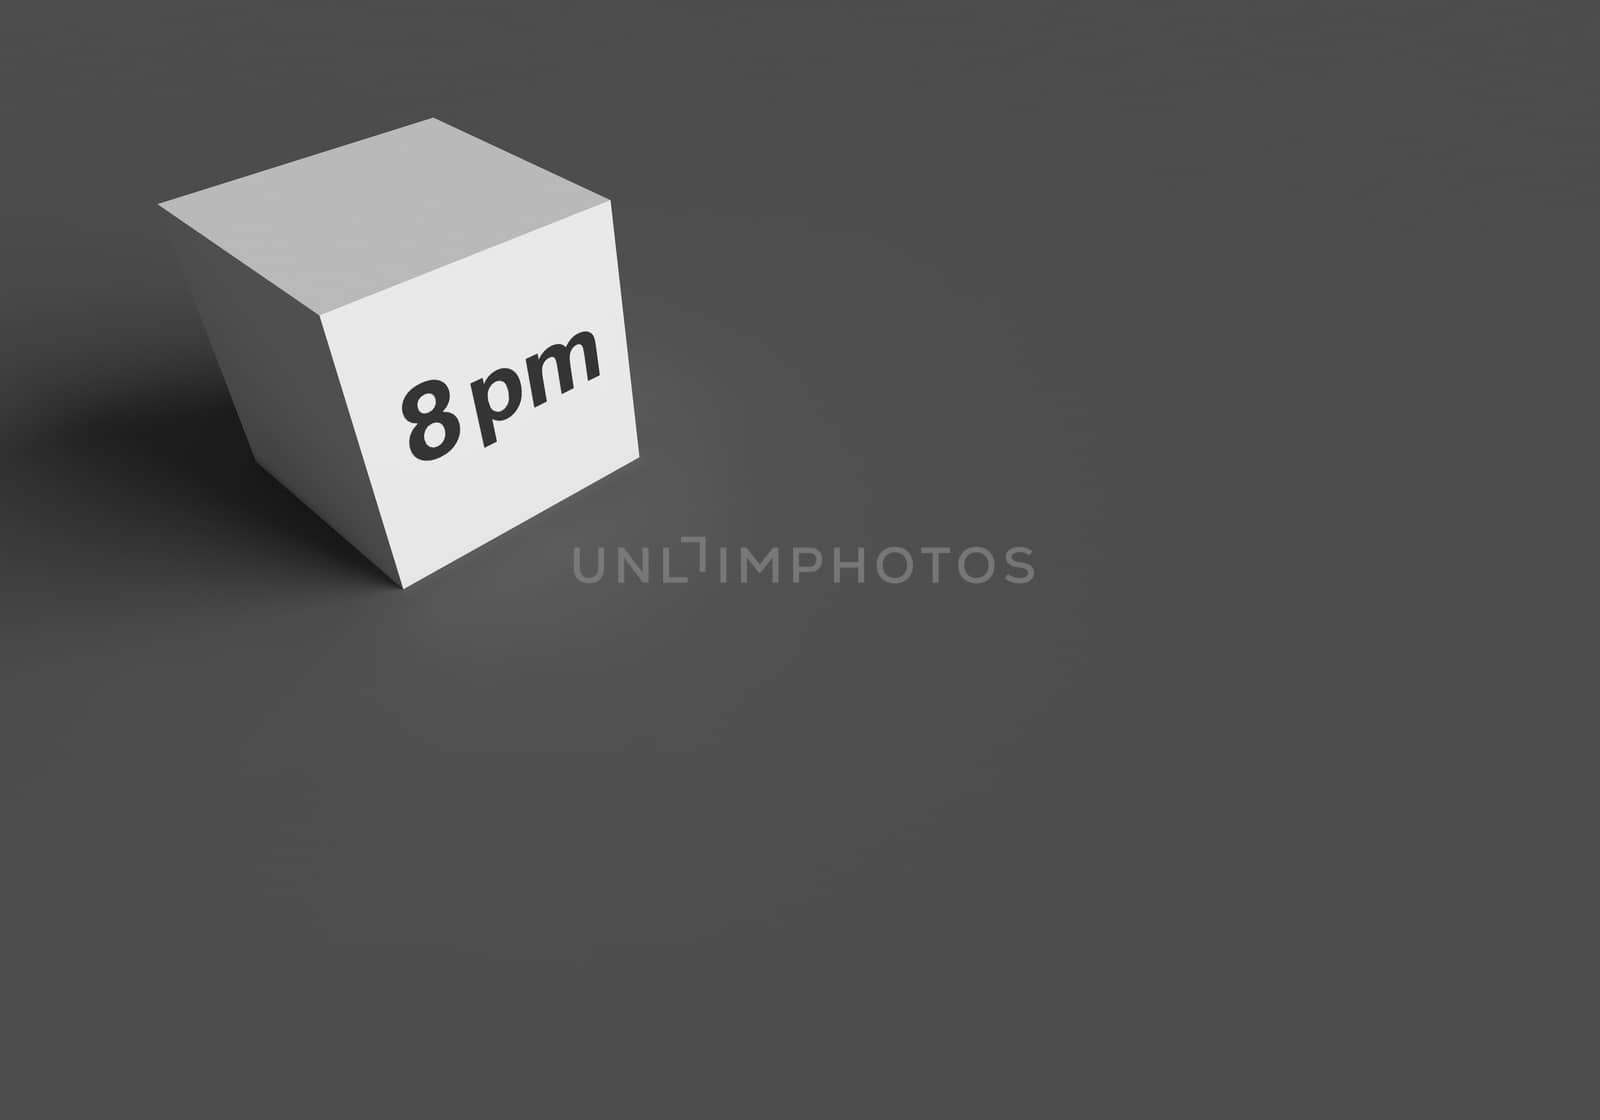 3D RENDERING WORDS 8 pm ON WHITE CUBE by PrettyTG